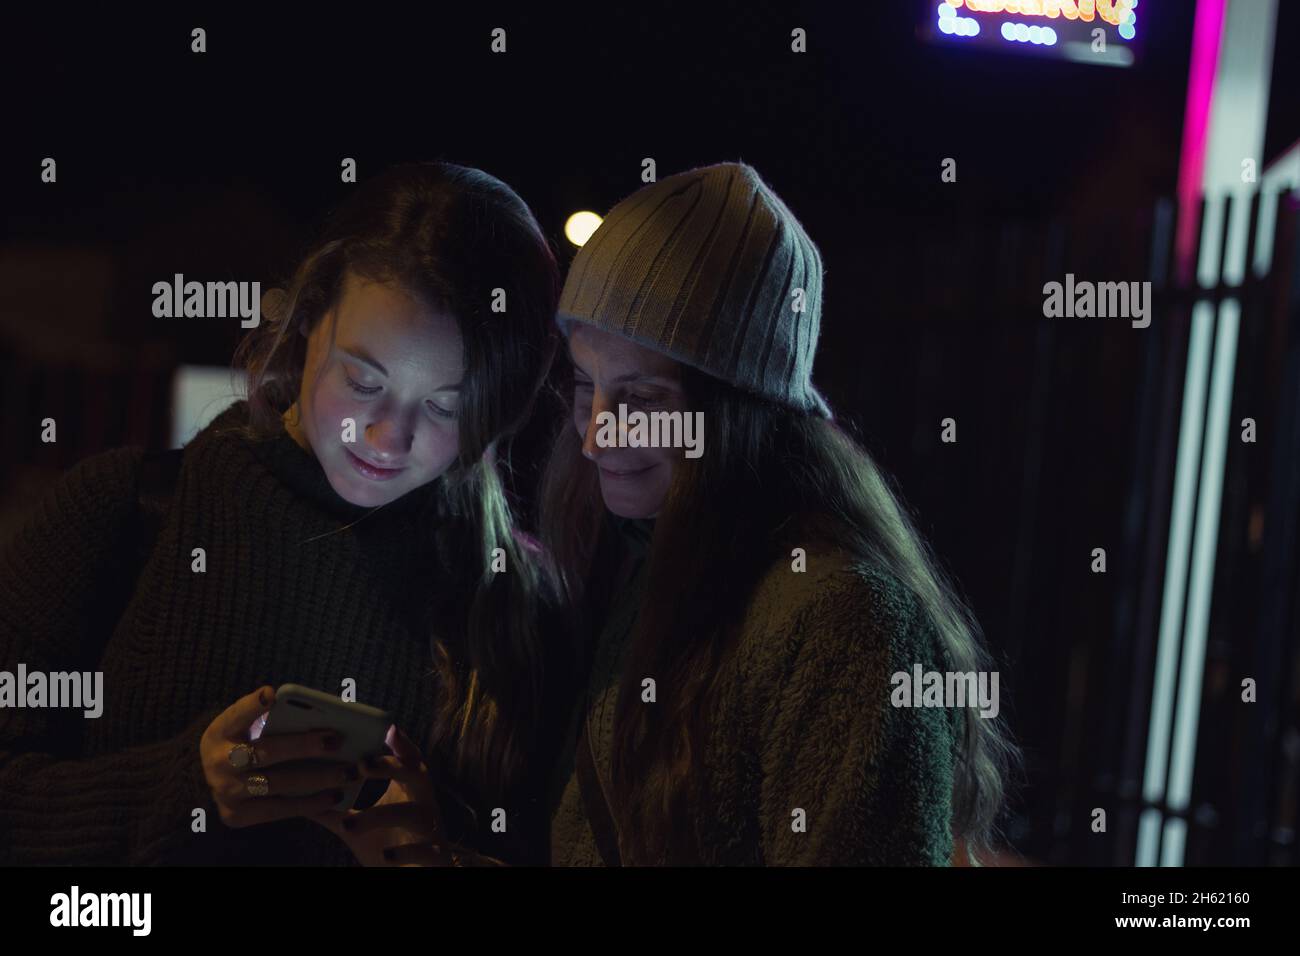 Young girl using cell phone next to older sister with grey knit hat on cold winter night outdoors Stock Photo